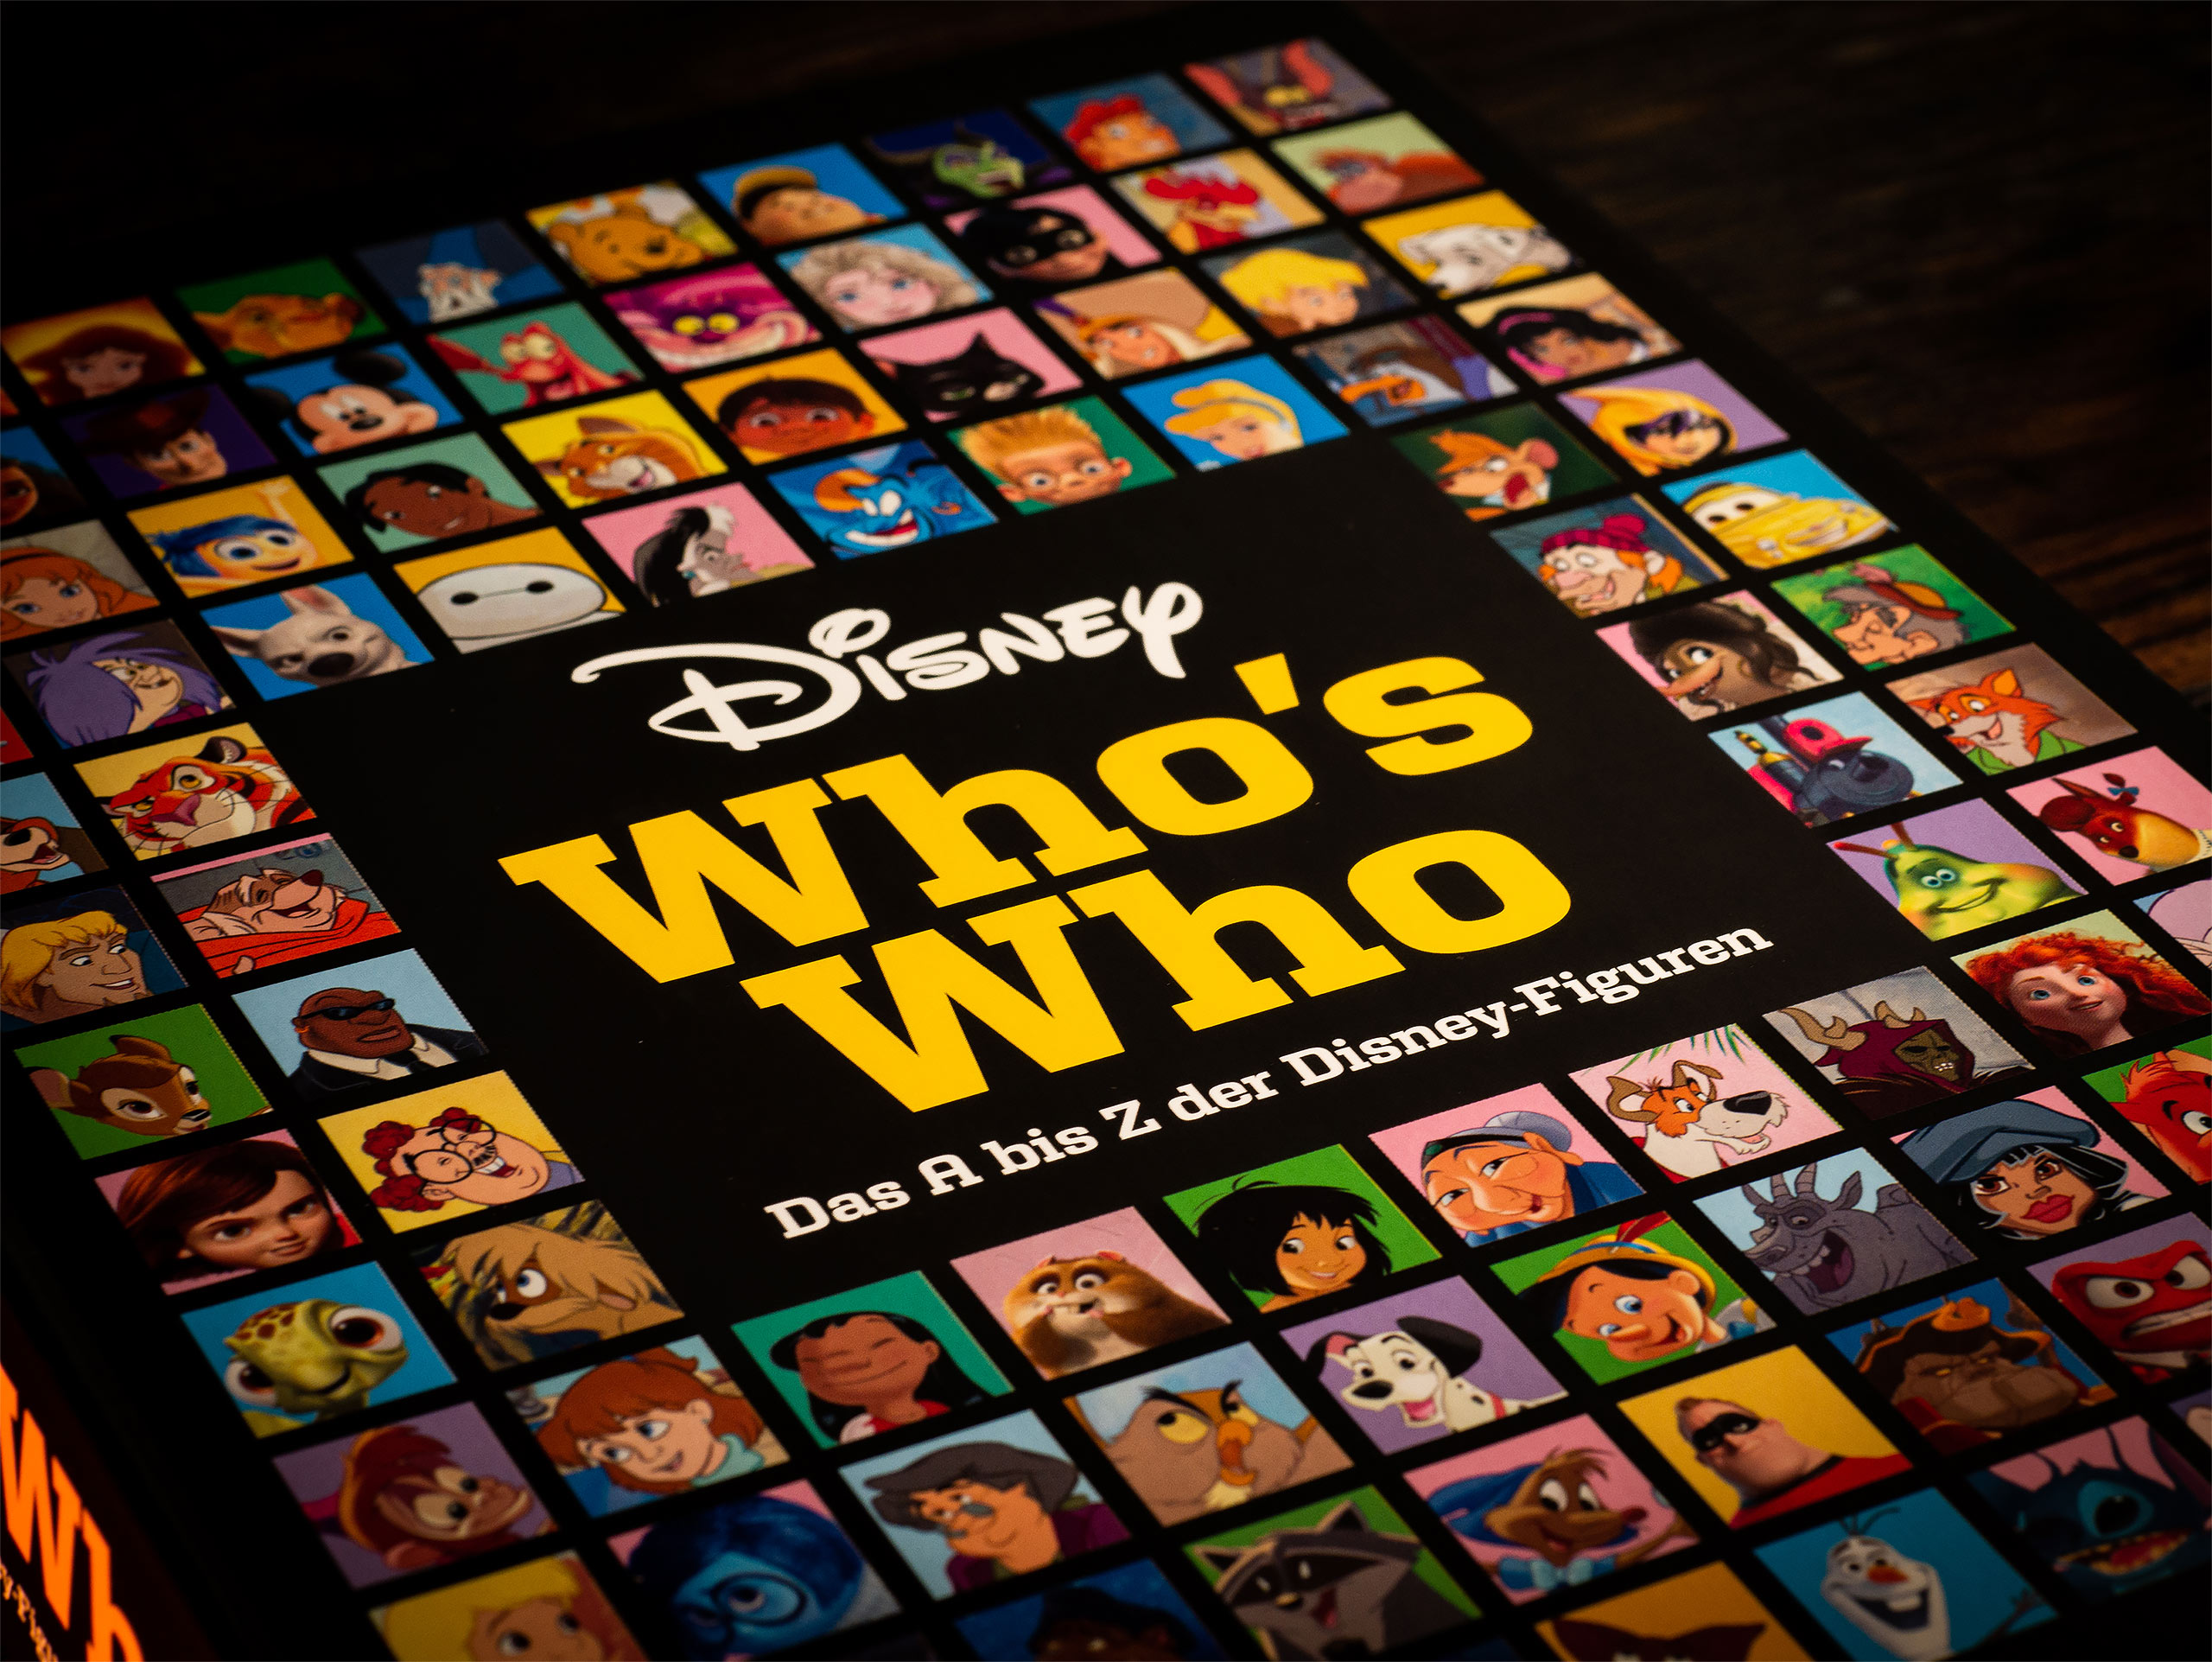 Disney - Who's Who - The A to Z of Disney Characters